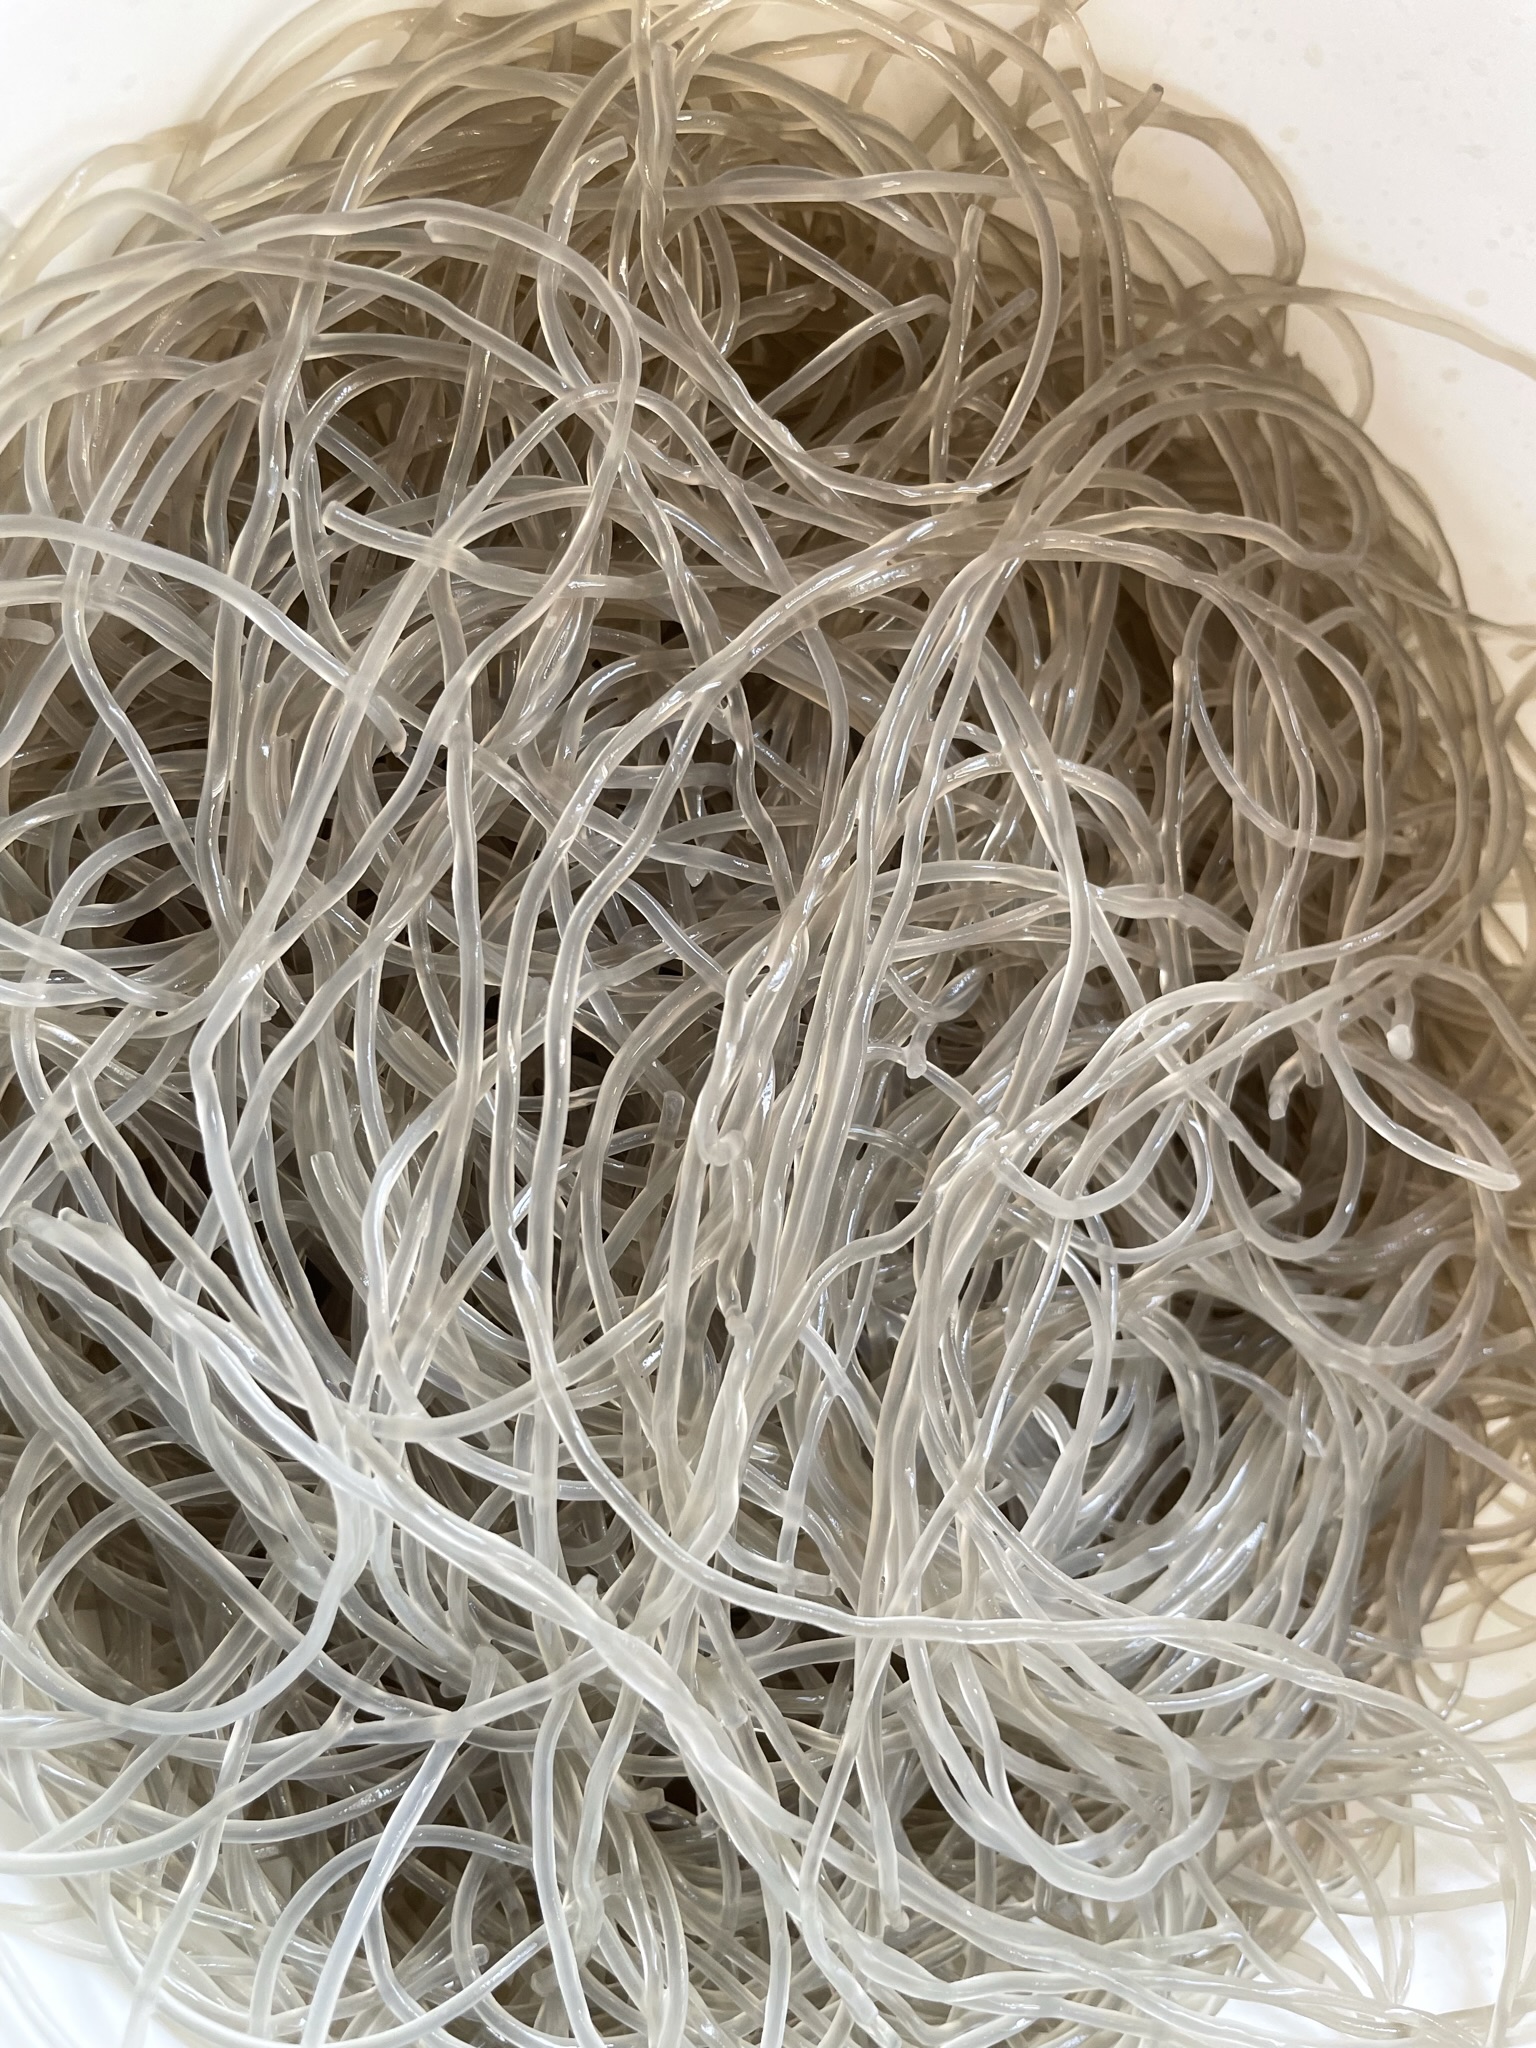 Rehydrated noodles are pliable.